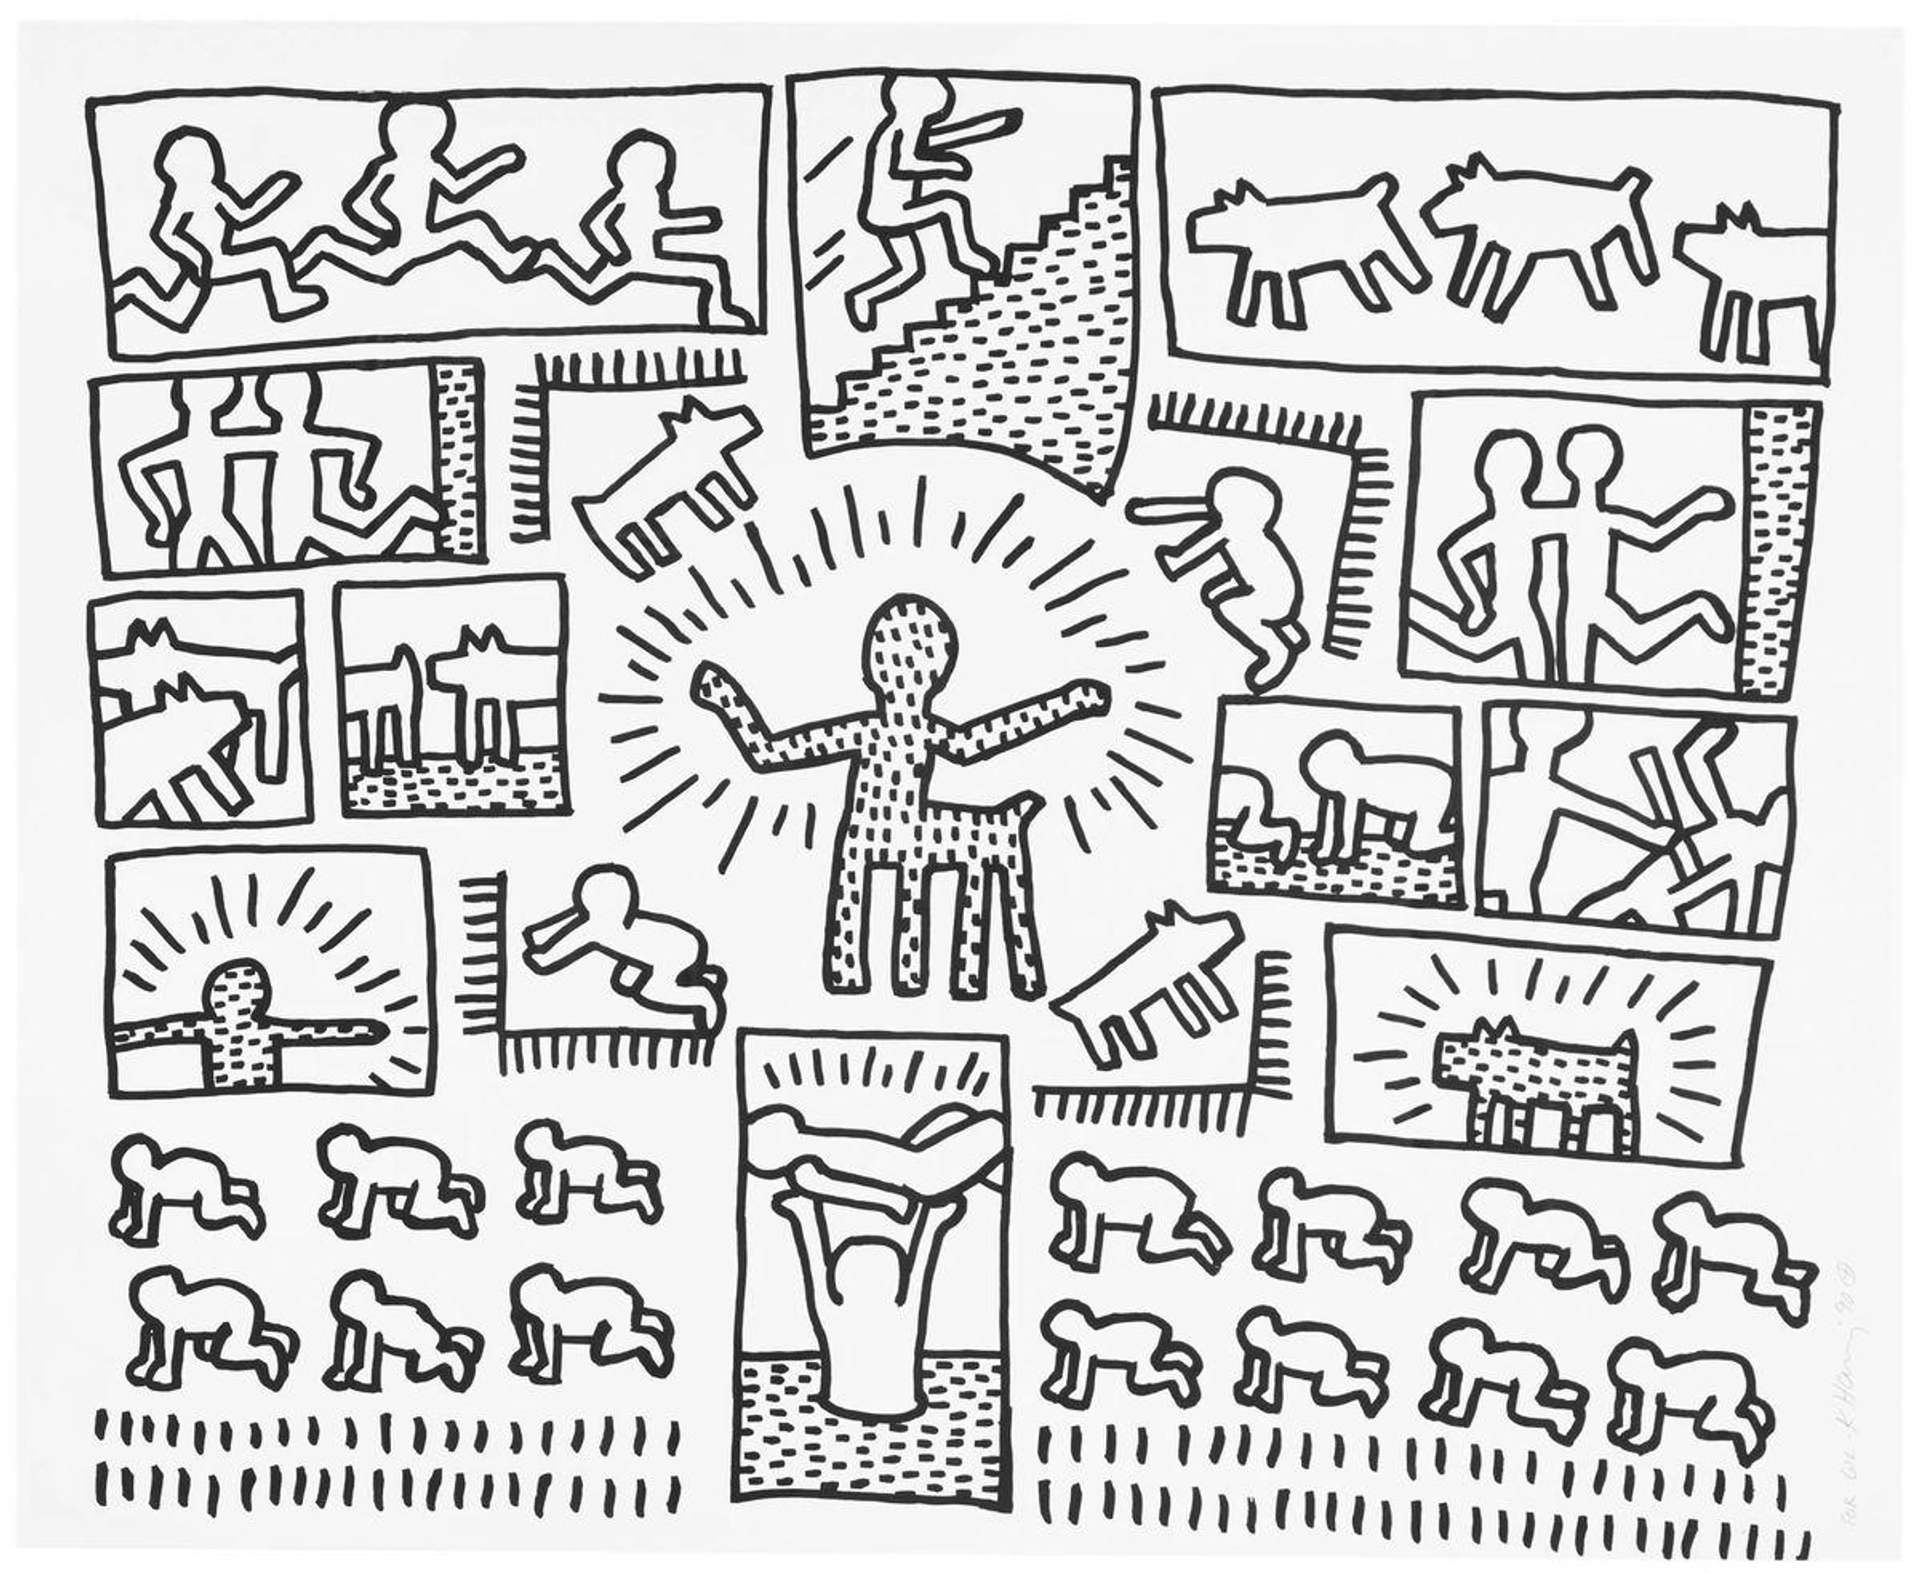 The Blueprint Drawings 10 by Keith Haring